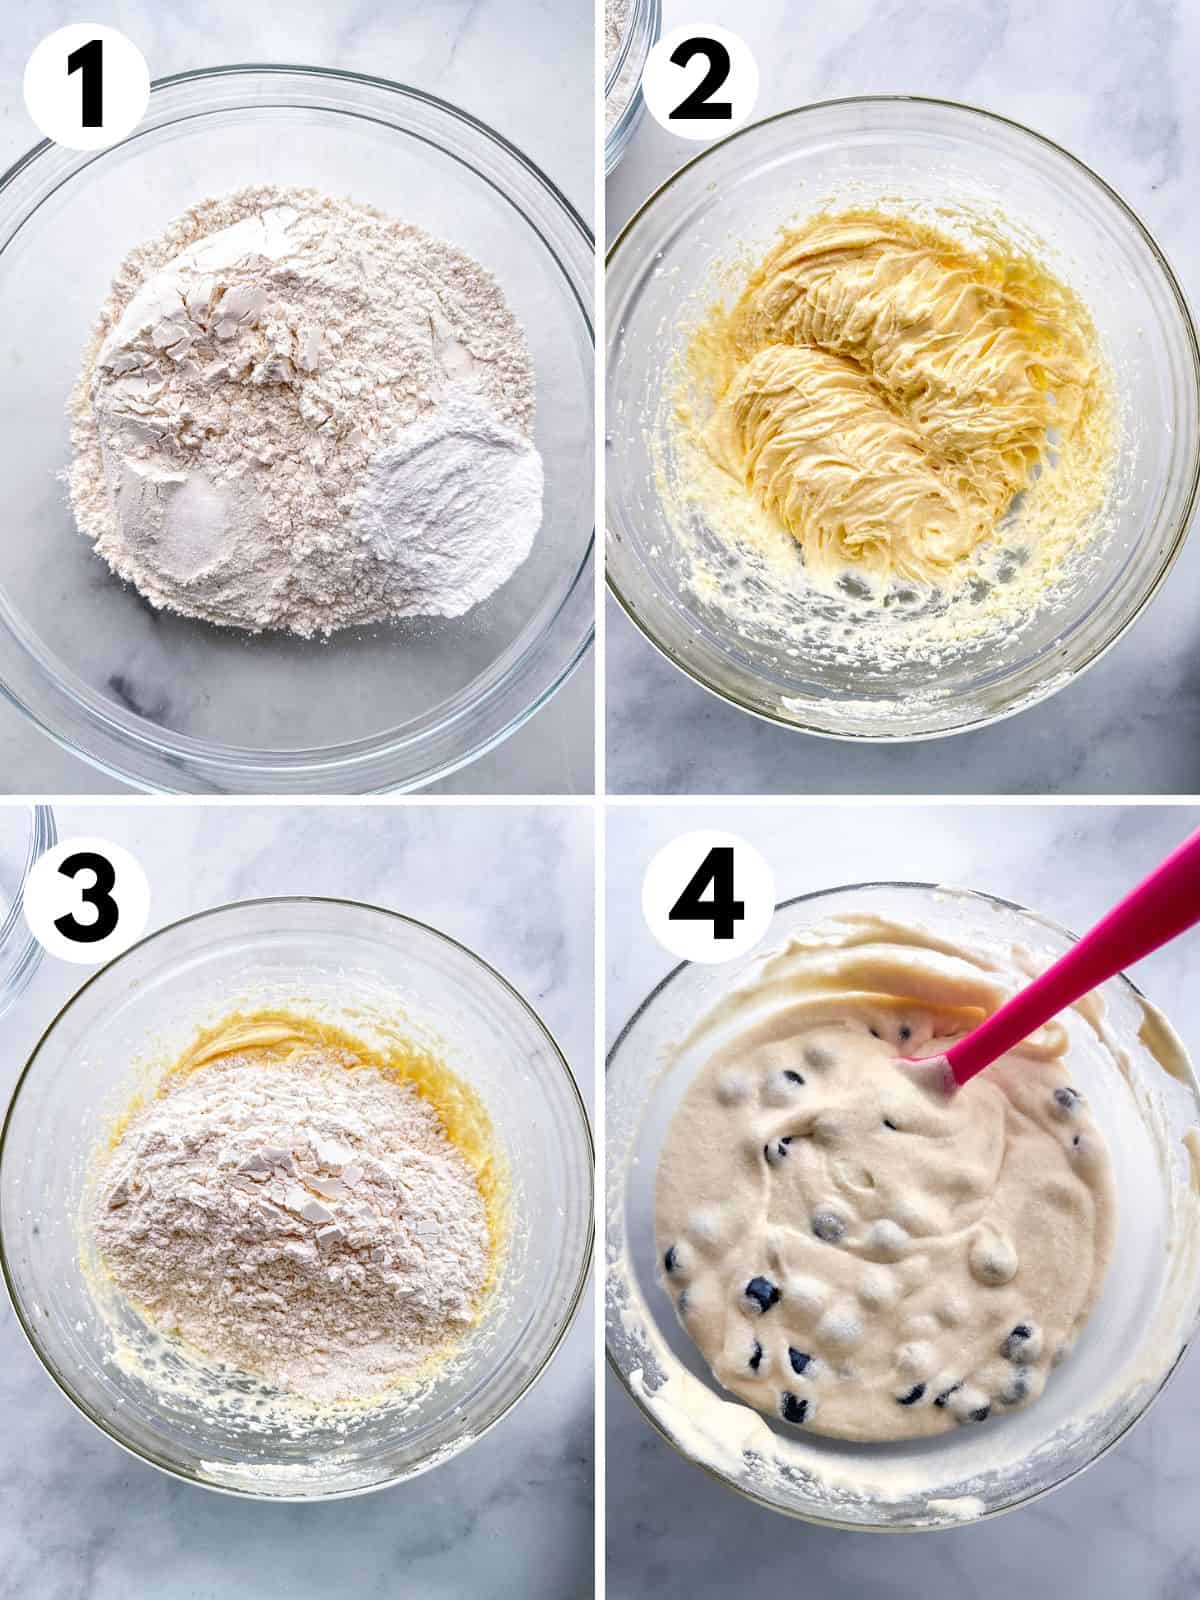 Steps one through four for making gluten-free blueberry muffins. 1. The dry ingredients together in a glass bowl. 2. The creamed butter, sugar, and eggs. 3. Adding the gluten-free flour to the butter mixture in the glass bowl. 4. The finished batter with blueberries stirred in.